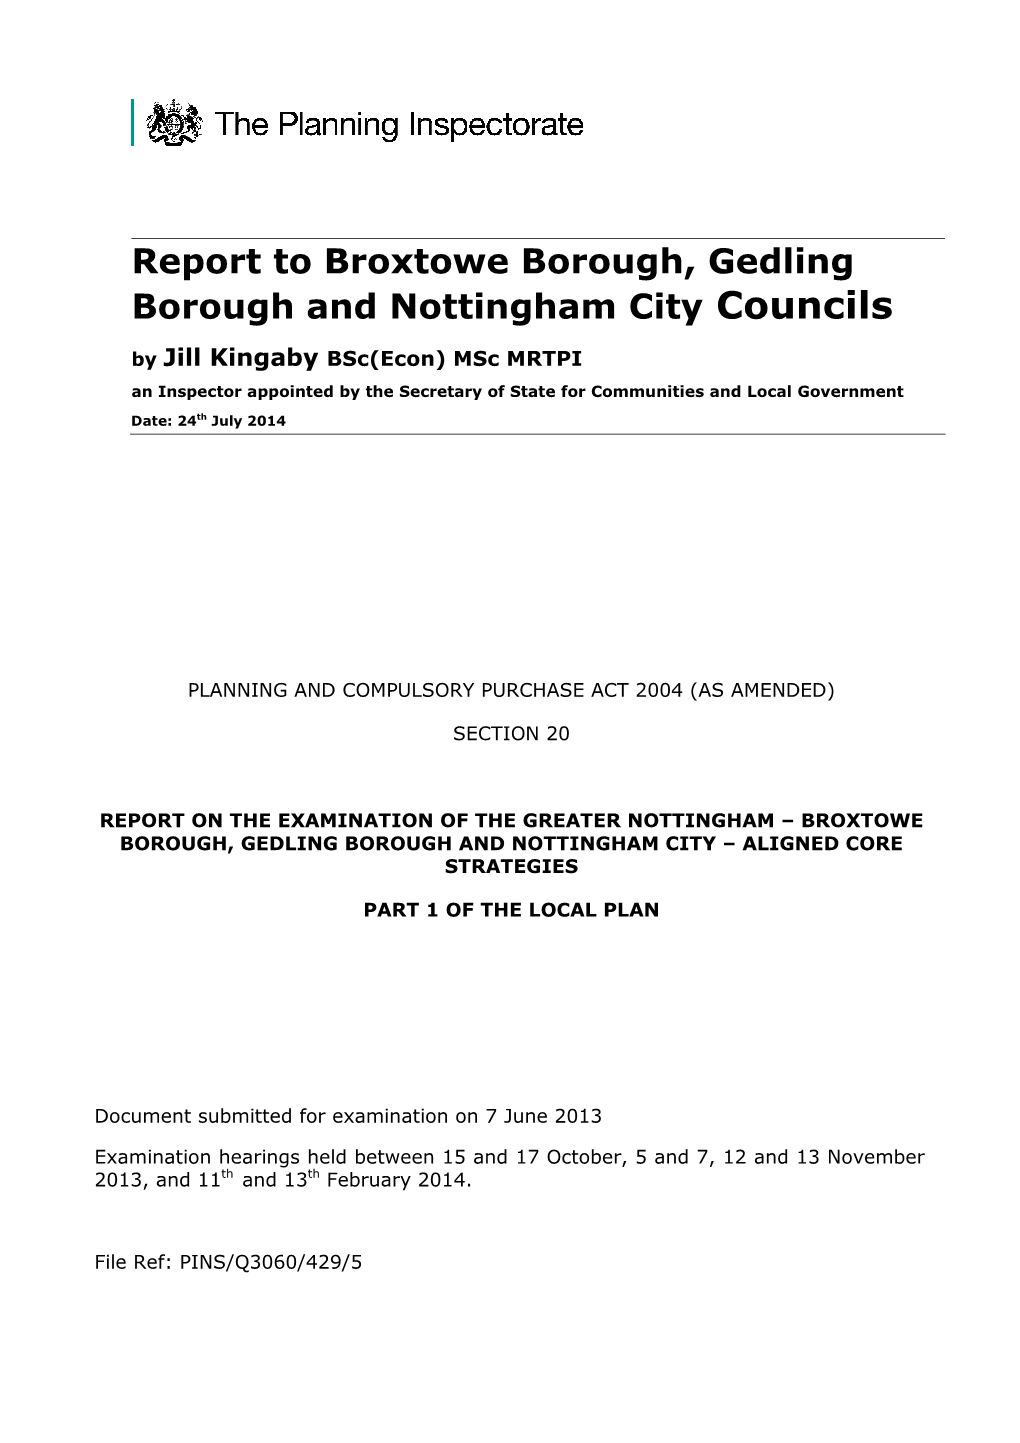 Report to Broxtowe Borough, Gedling Borough and Nottingham City Councils